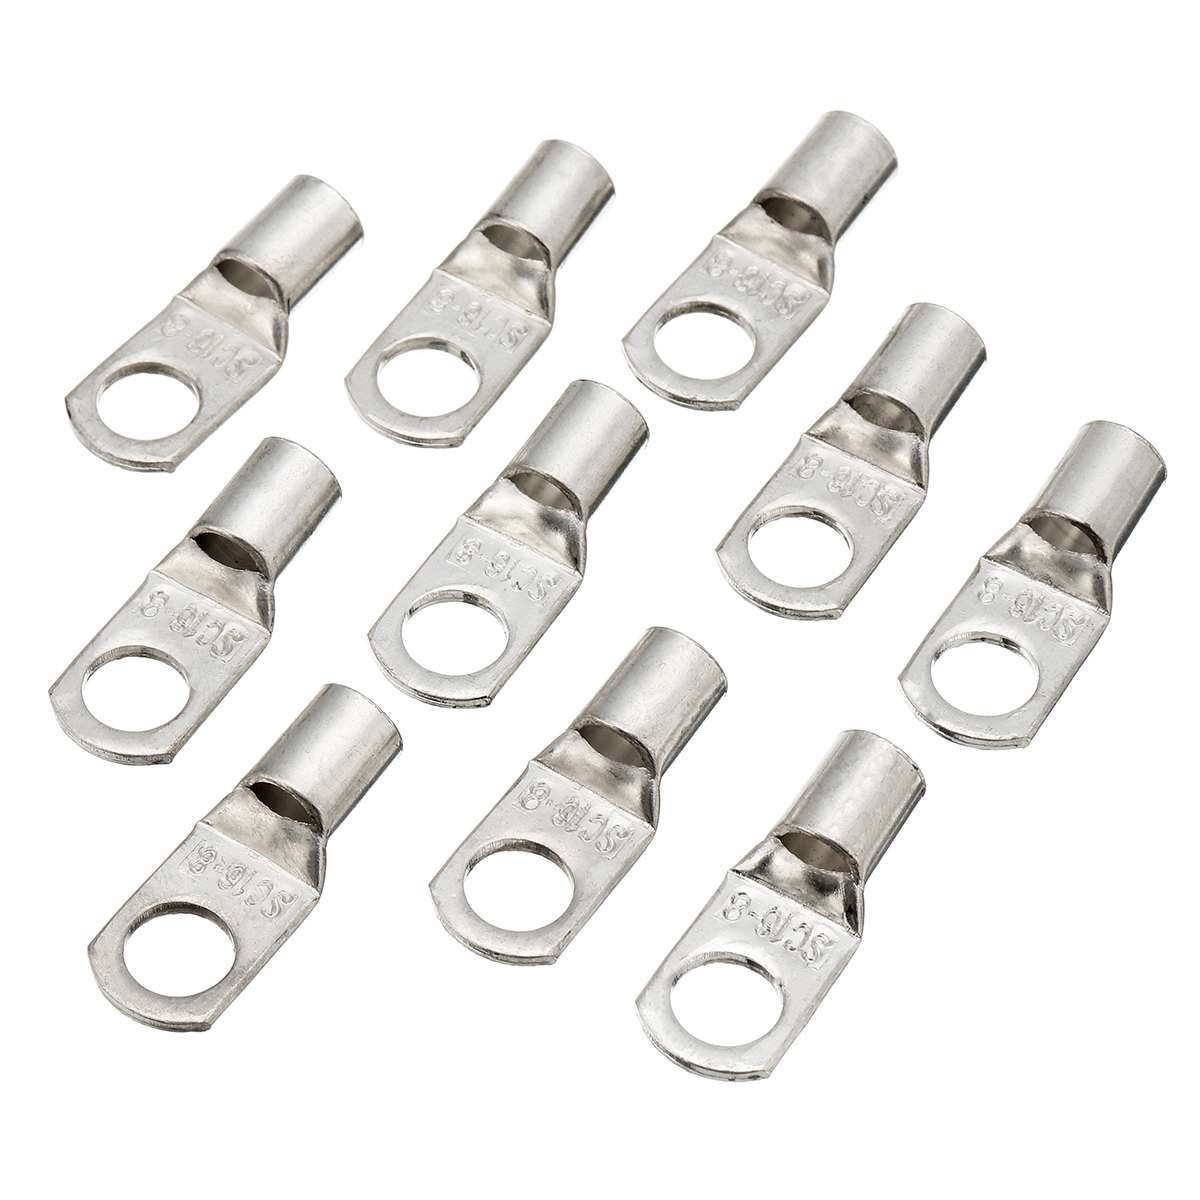 10Pcs Cable Lugs Set Terminal Silver Copper Electrical Block Wire 8mm Connectors Terminals for Battery Wire Auto Marine RV 4WD